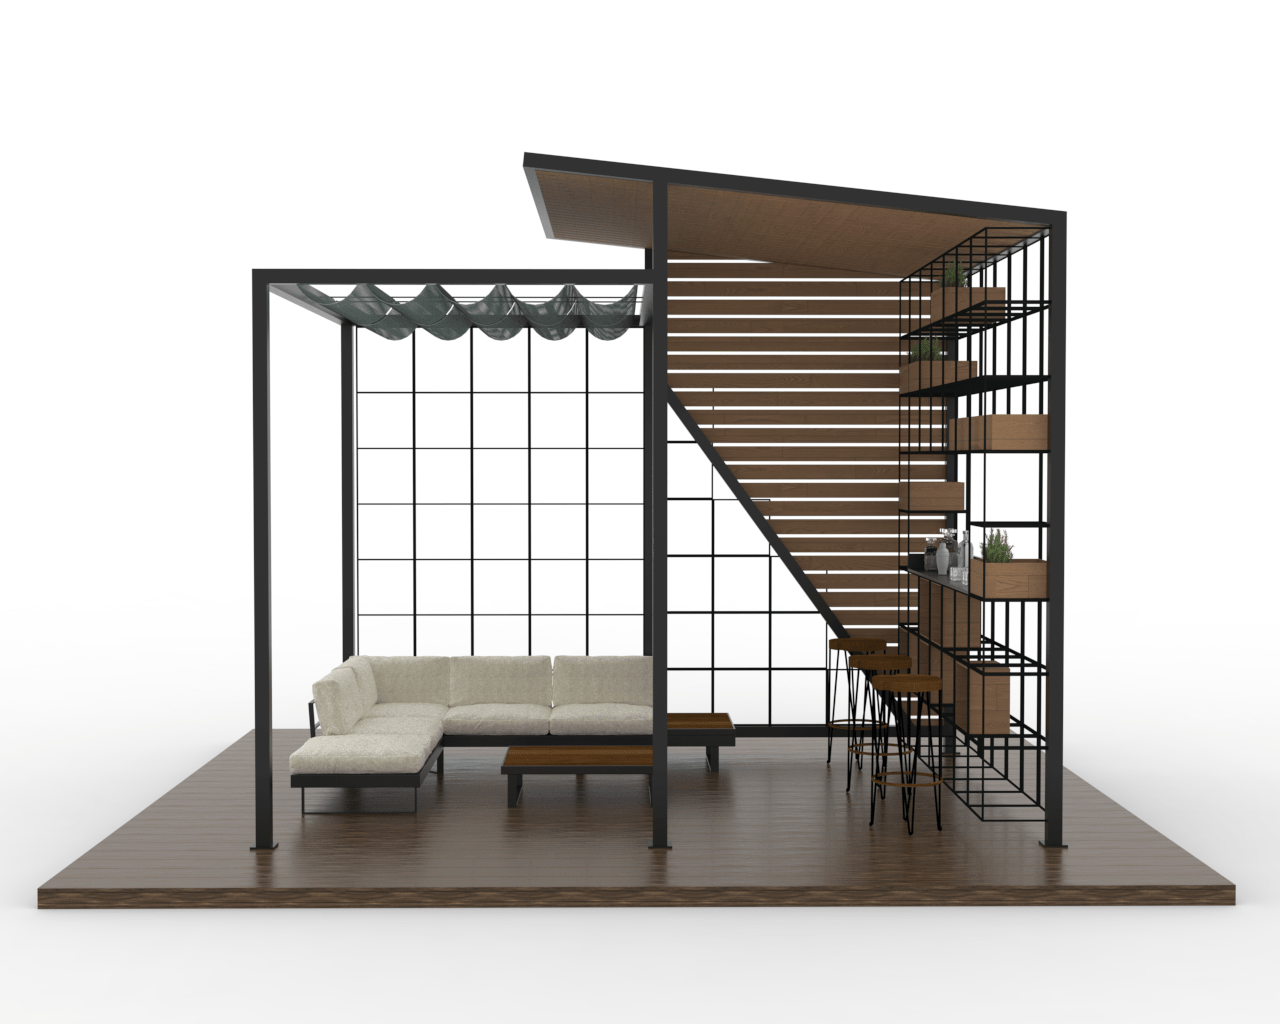 Academy Design's Blacksand cabana, front view, with a corrosion-resistant 6061-T6 aluminum frame. The open-air front contrasts with the mixed roof of slide-on-wire fabric and slats, and a diagonally split back design of aluminum grid and slats, embodying modern luxury.